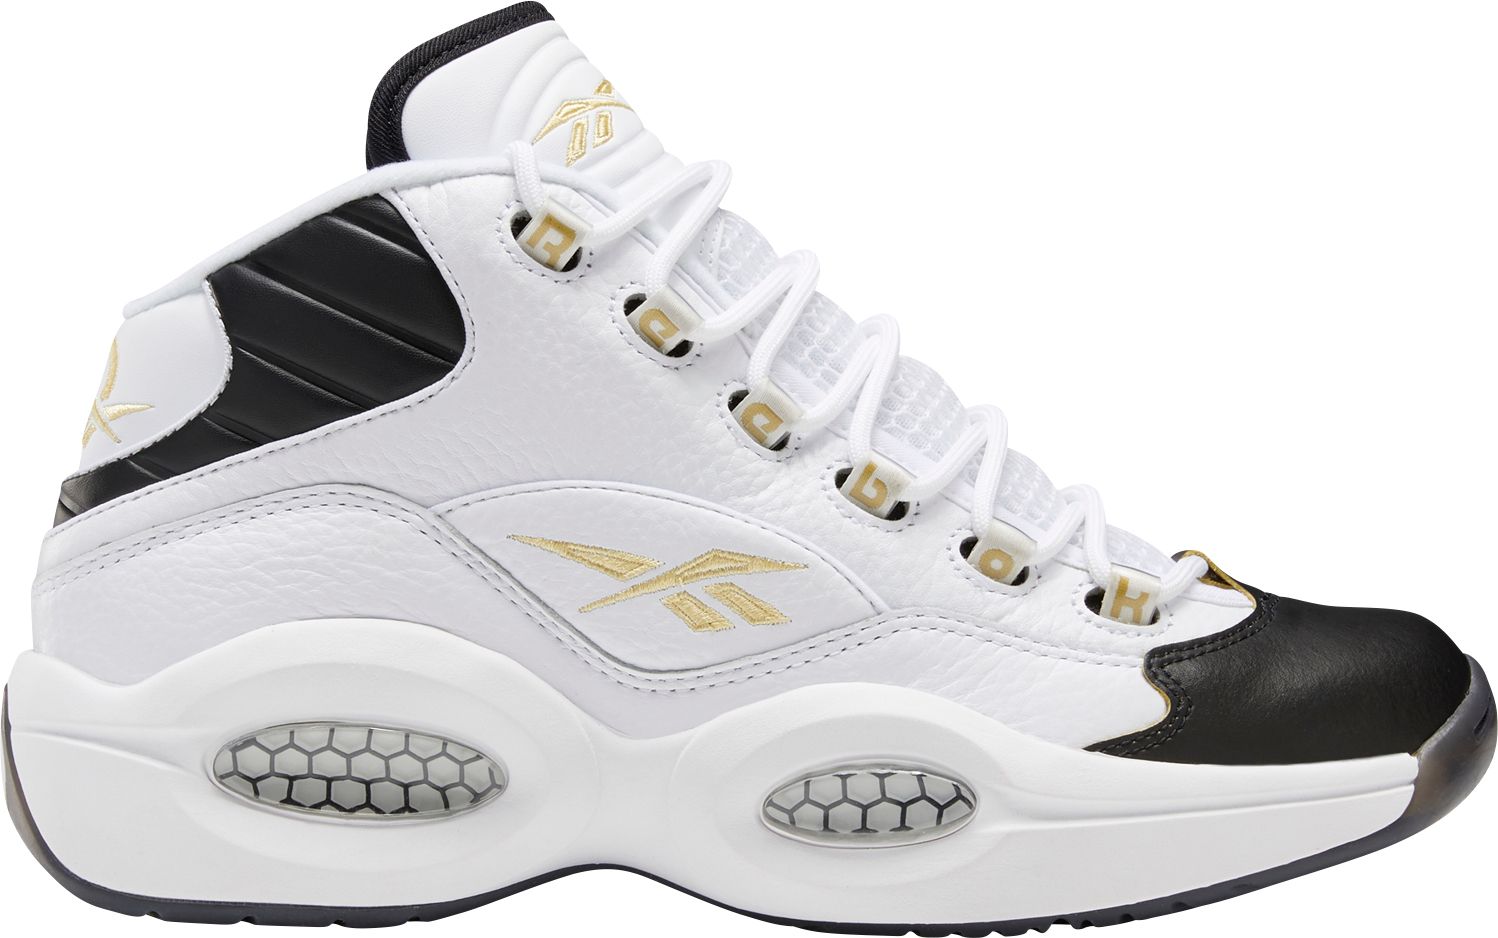 reebok question new year's eve for sale